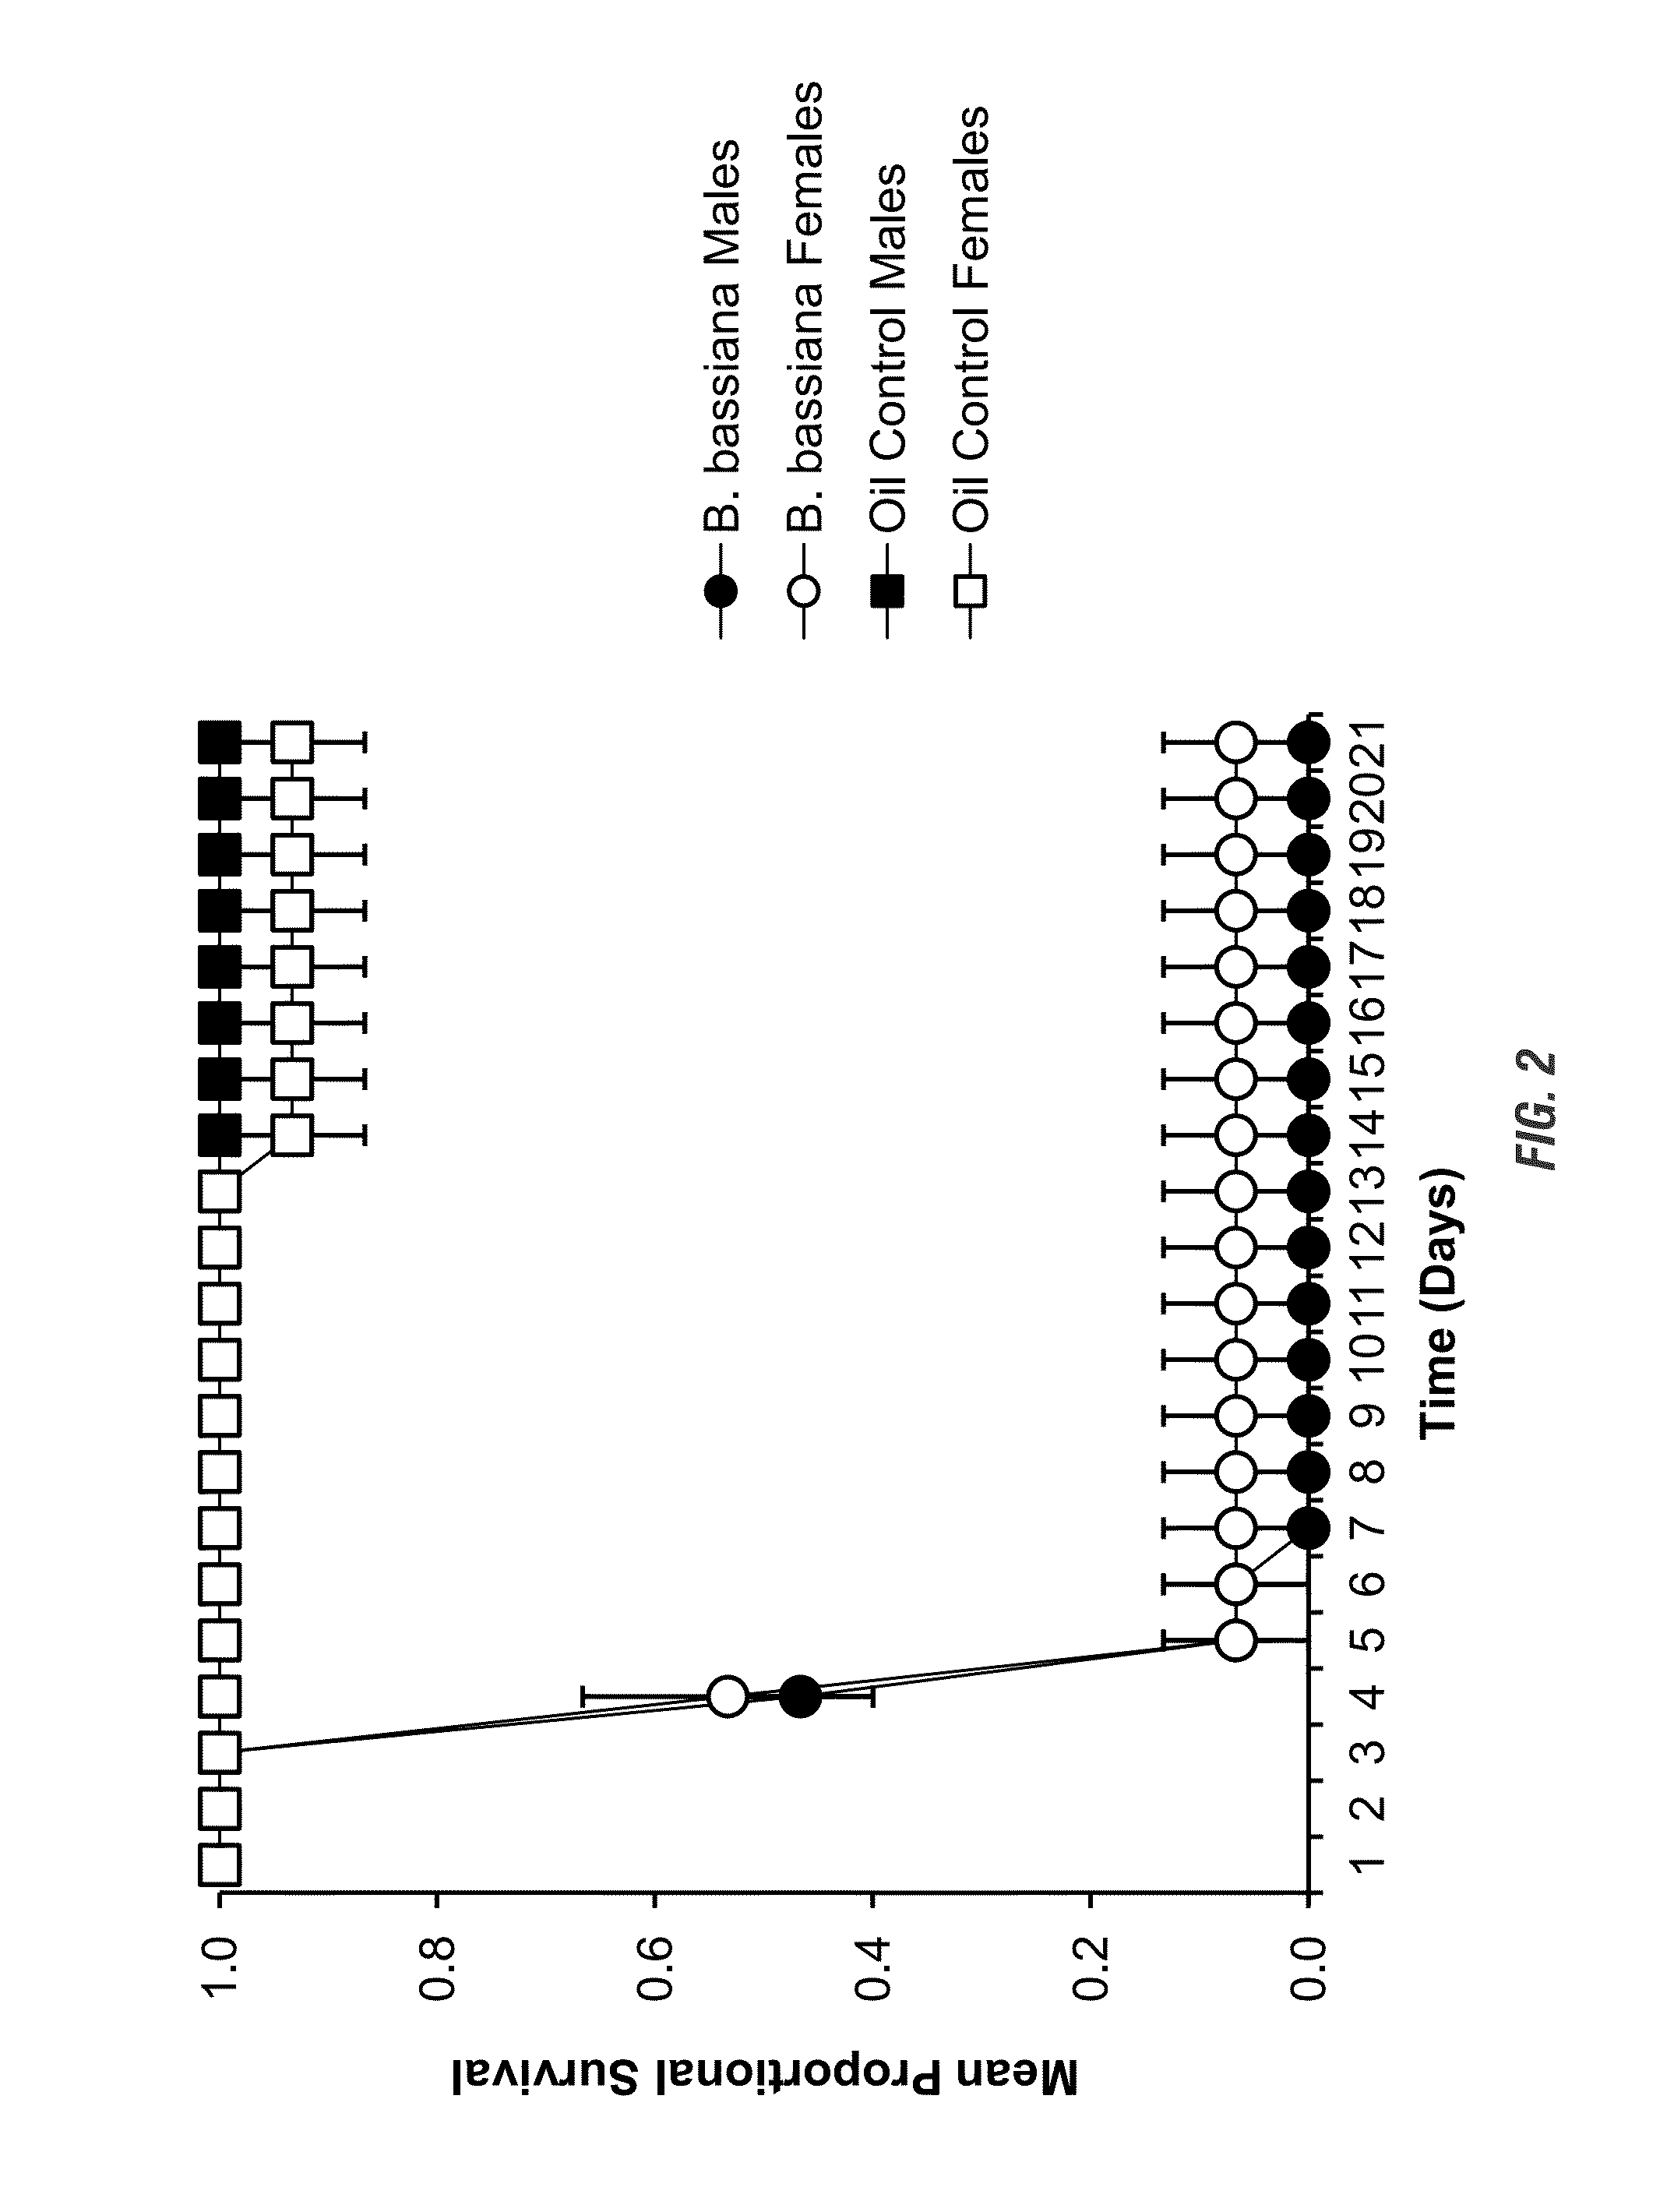 Compositions and methods for bed bug control using entomopathogenic fungi